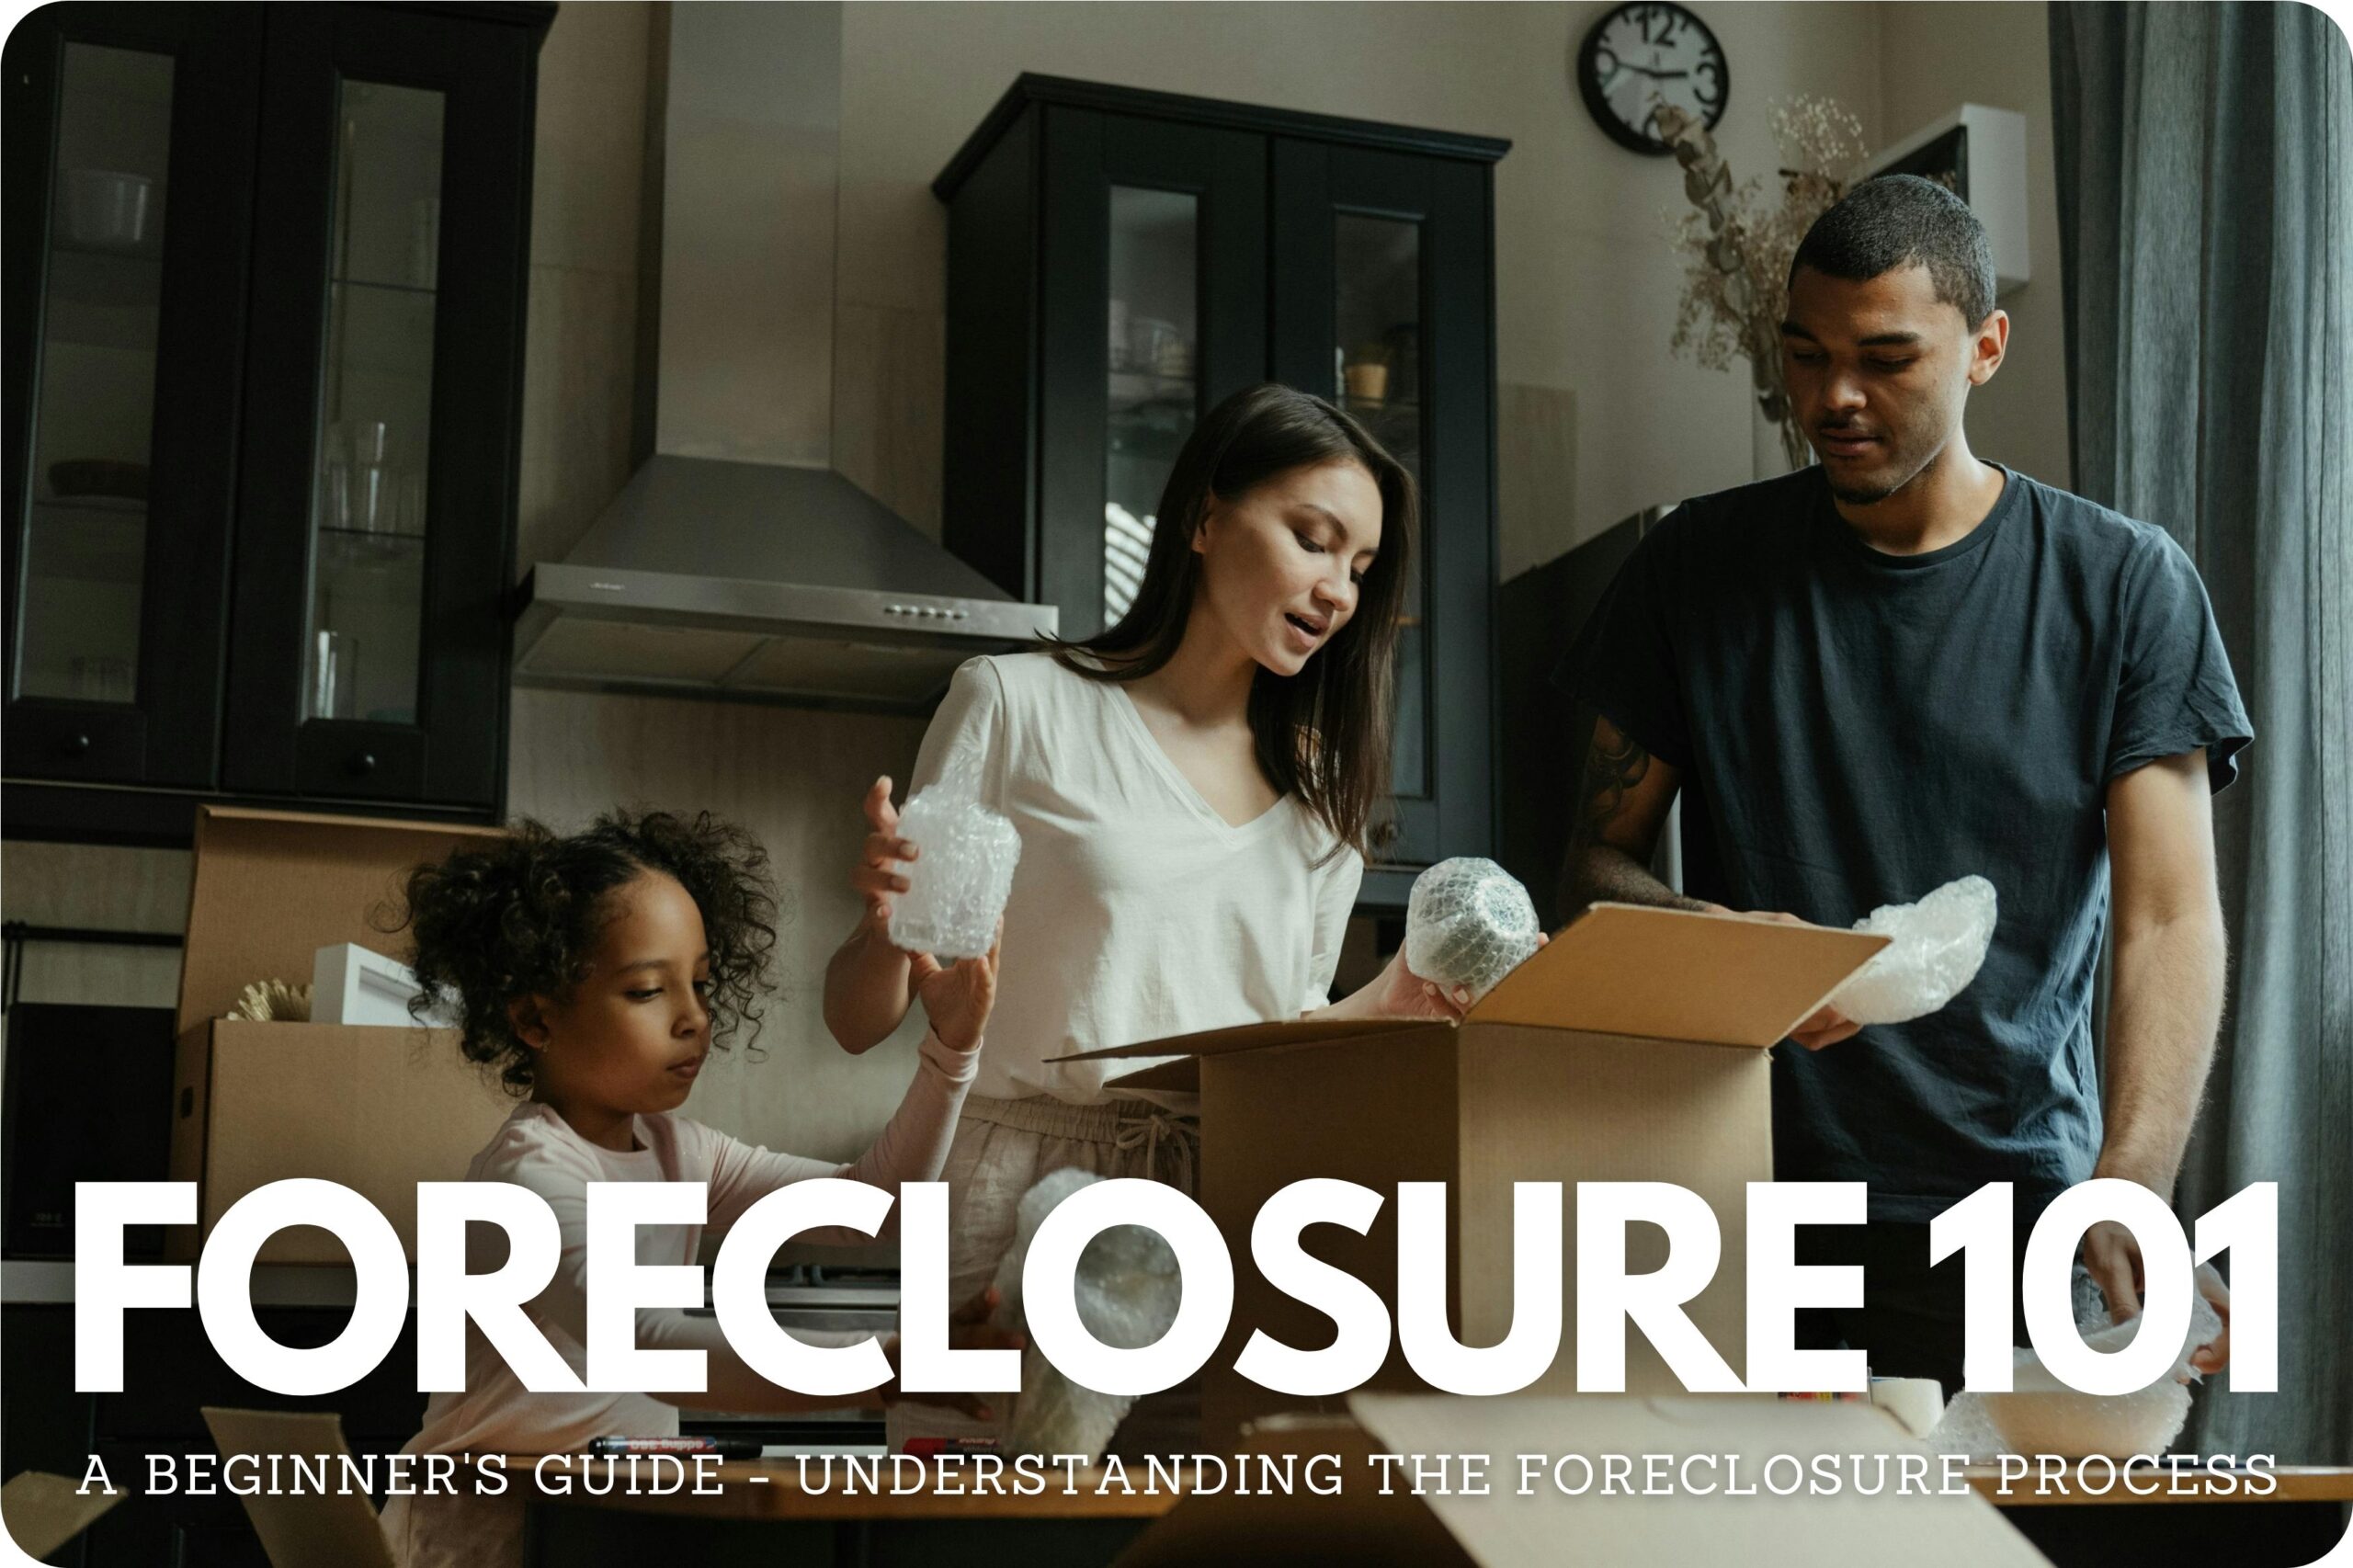 Happy family unloading groceries in kitchen, secure in their home thanks to effective foreclosure prevention strategies.